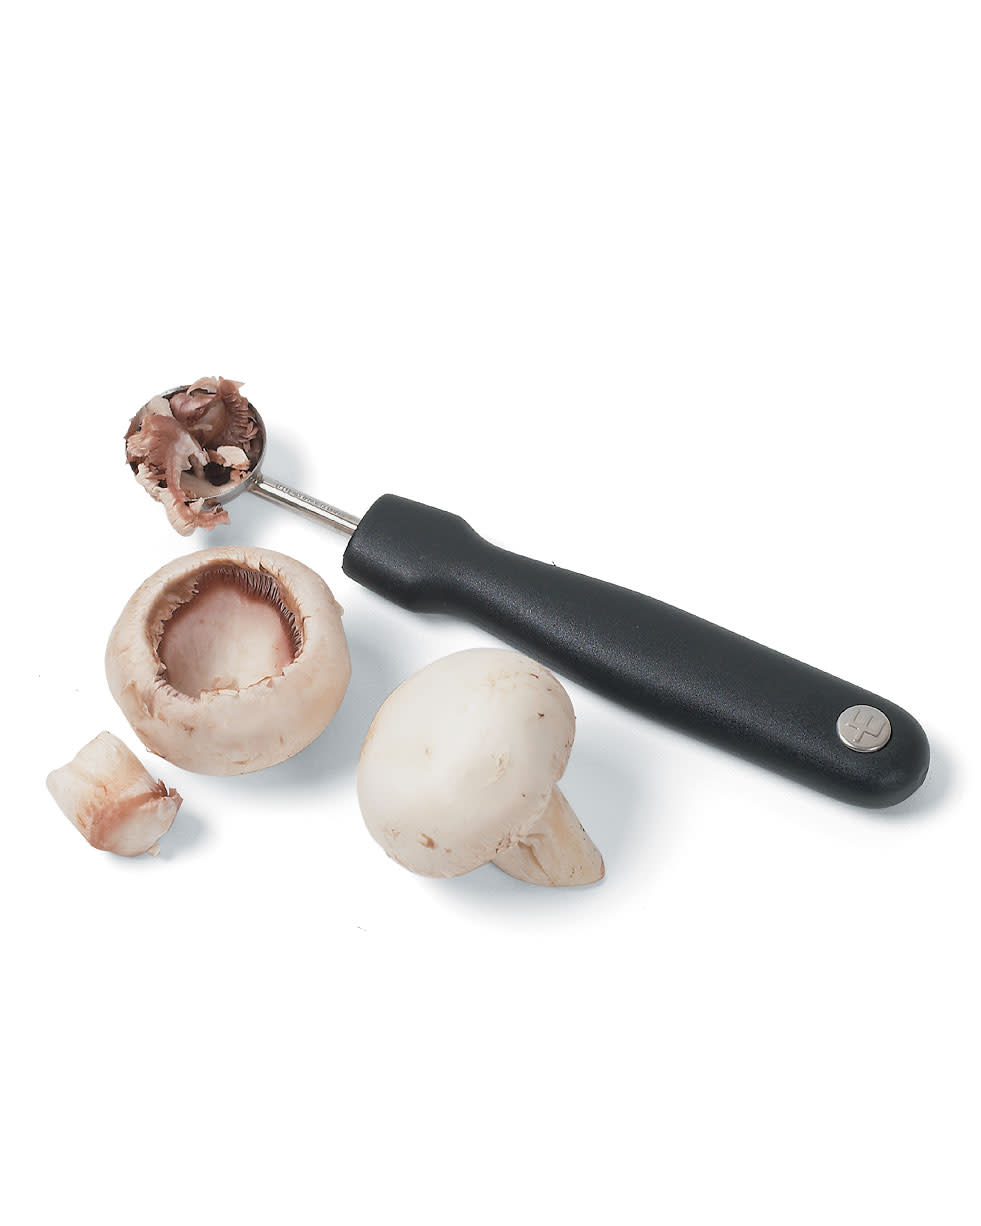 Tips-Hollow-Out-Mushrooms-with-Melon-Baller